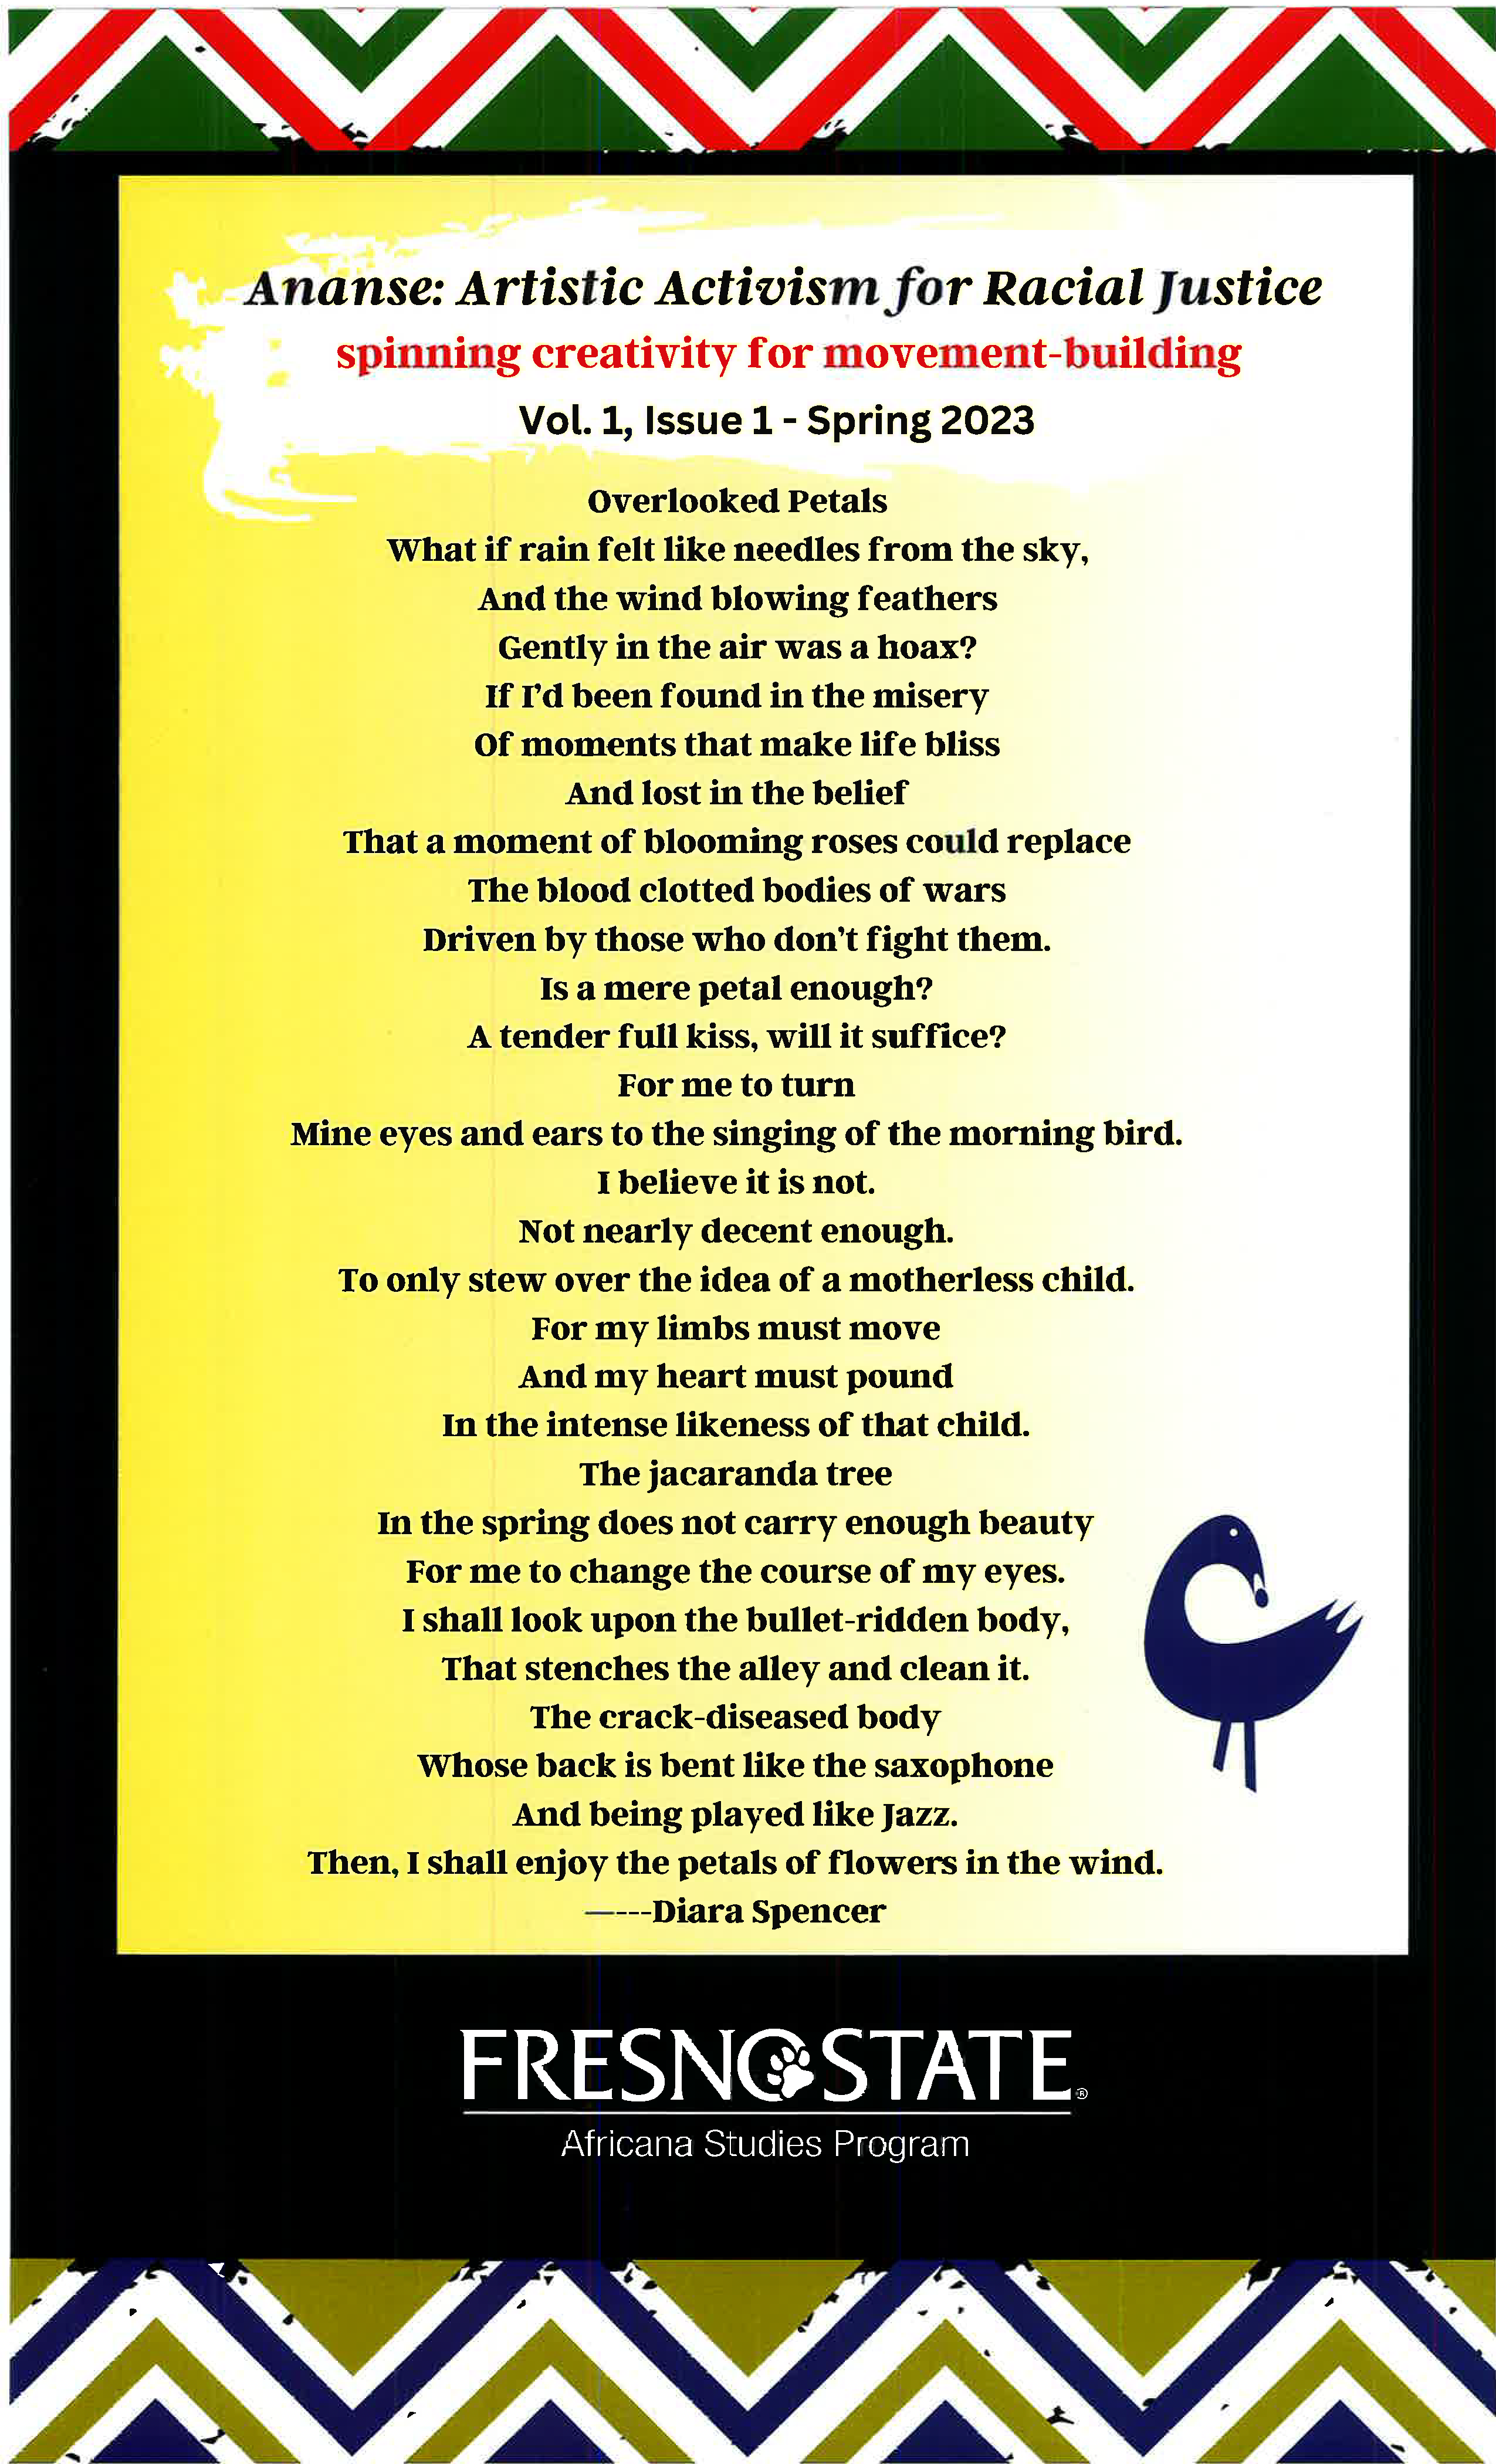 Poem on yellow backgroud and patterned border